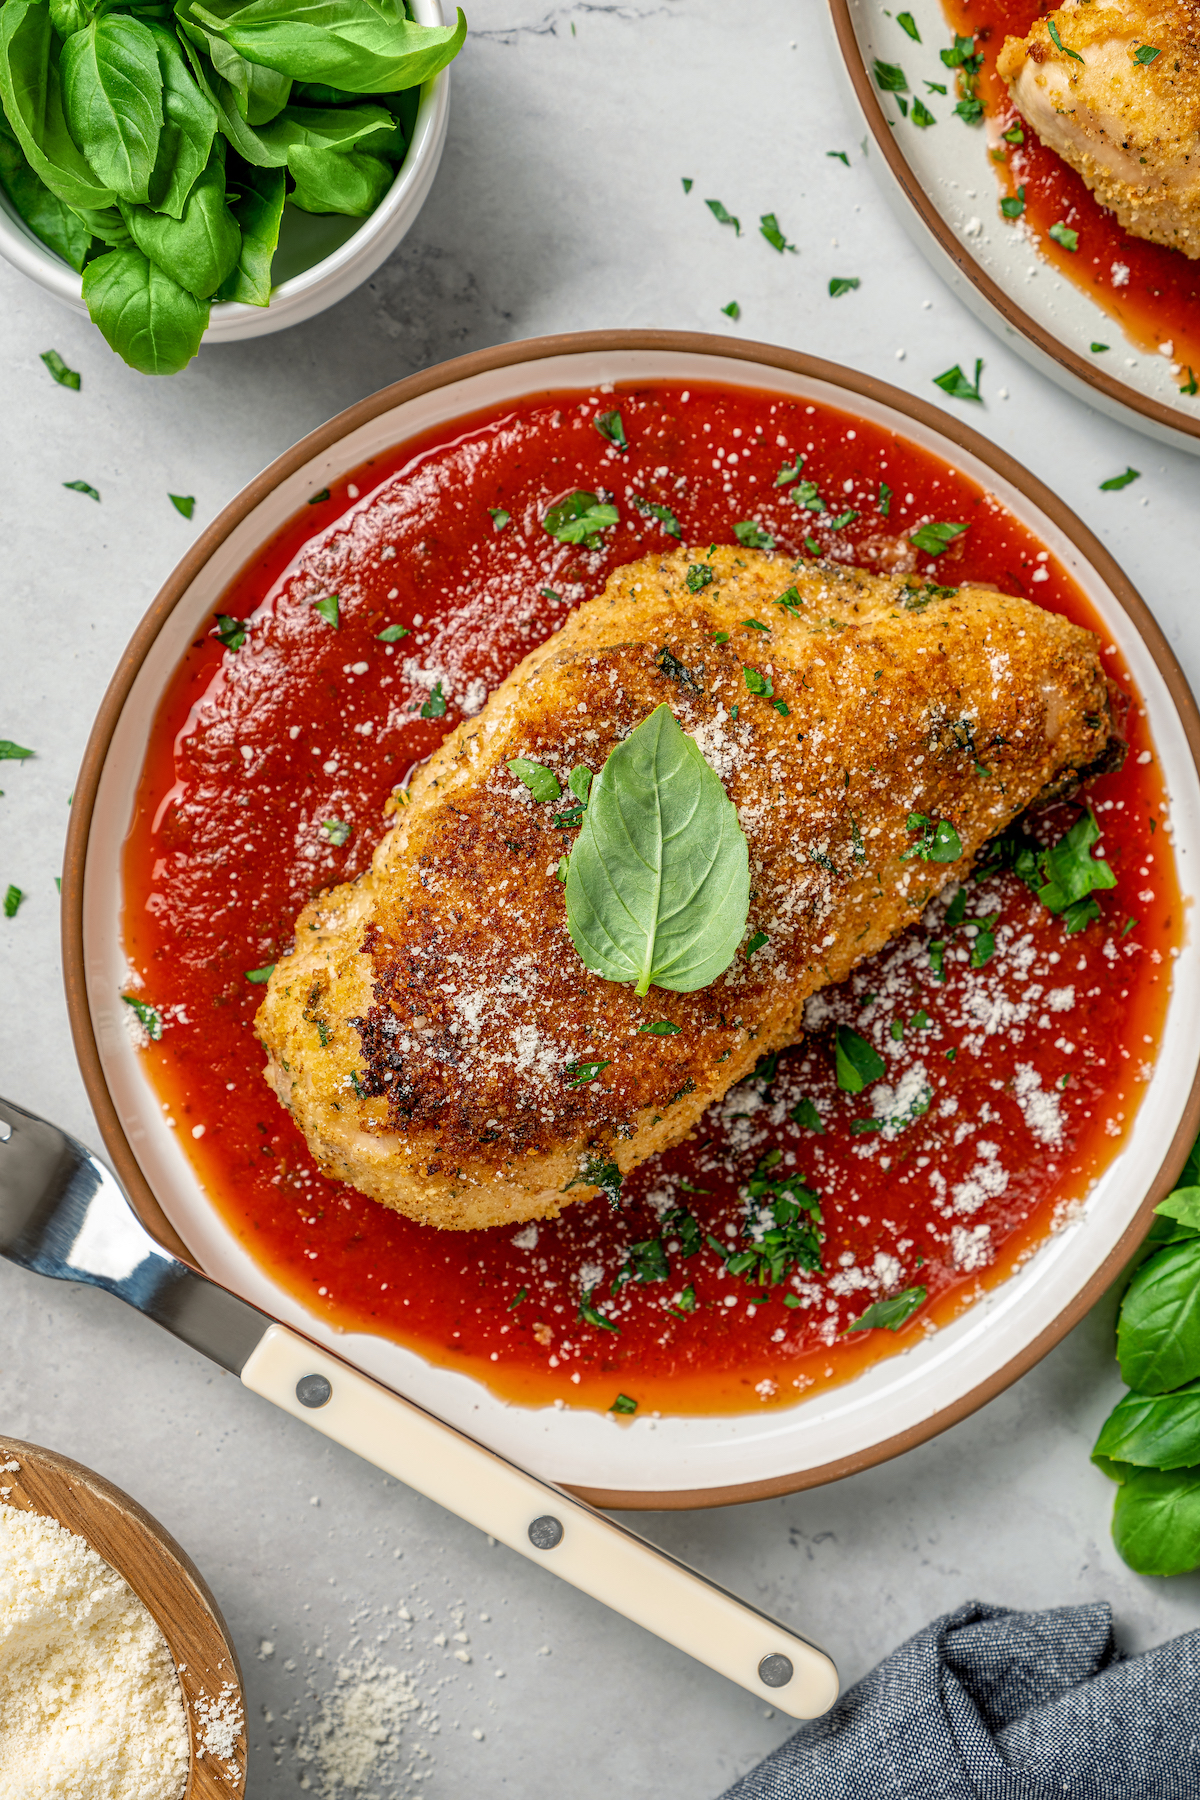 A plate of marinara with a breaded chicken breast on top, garnished with basil.